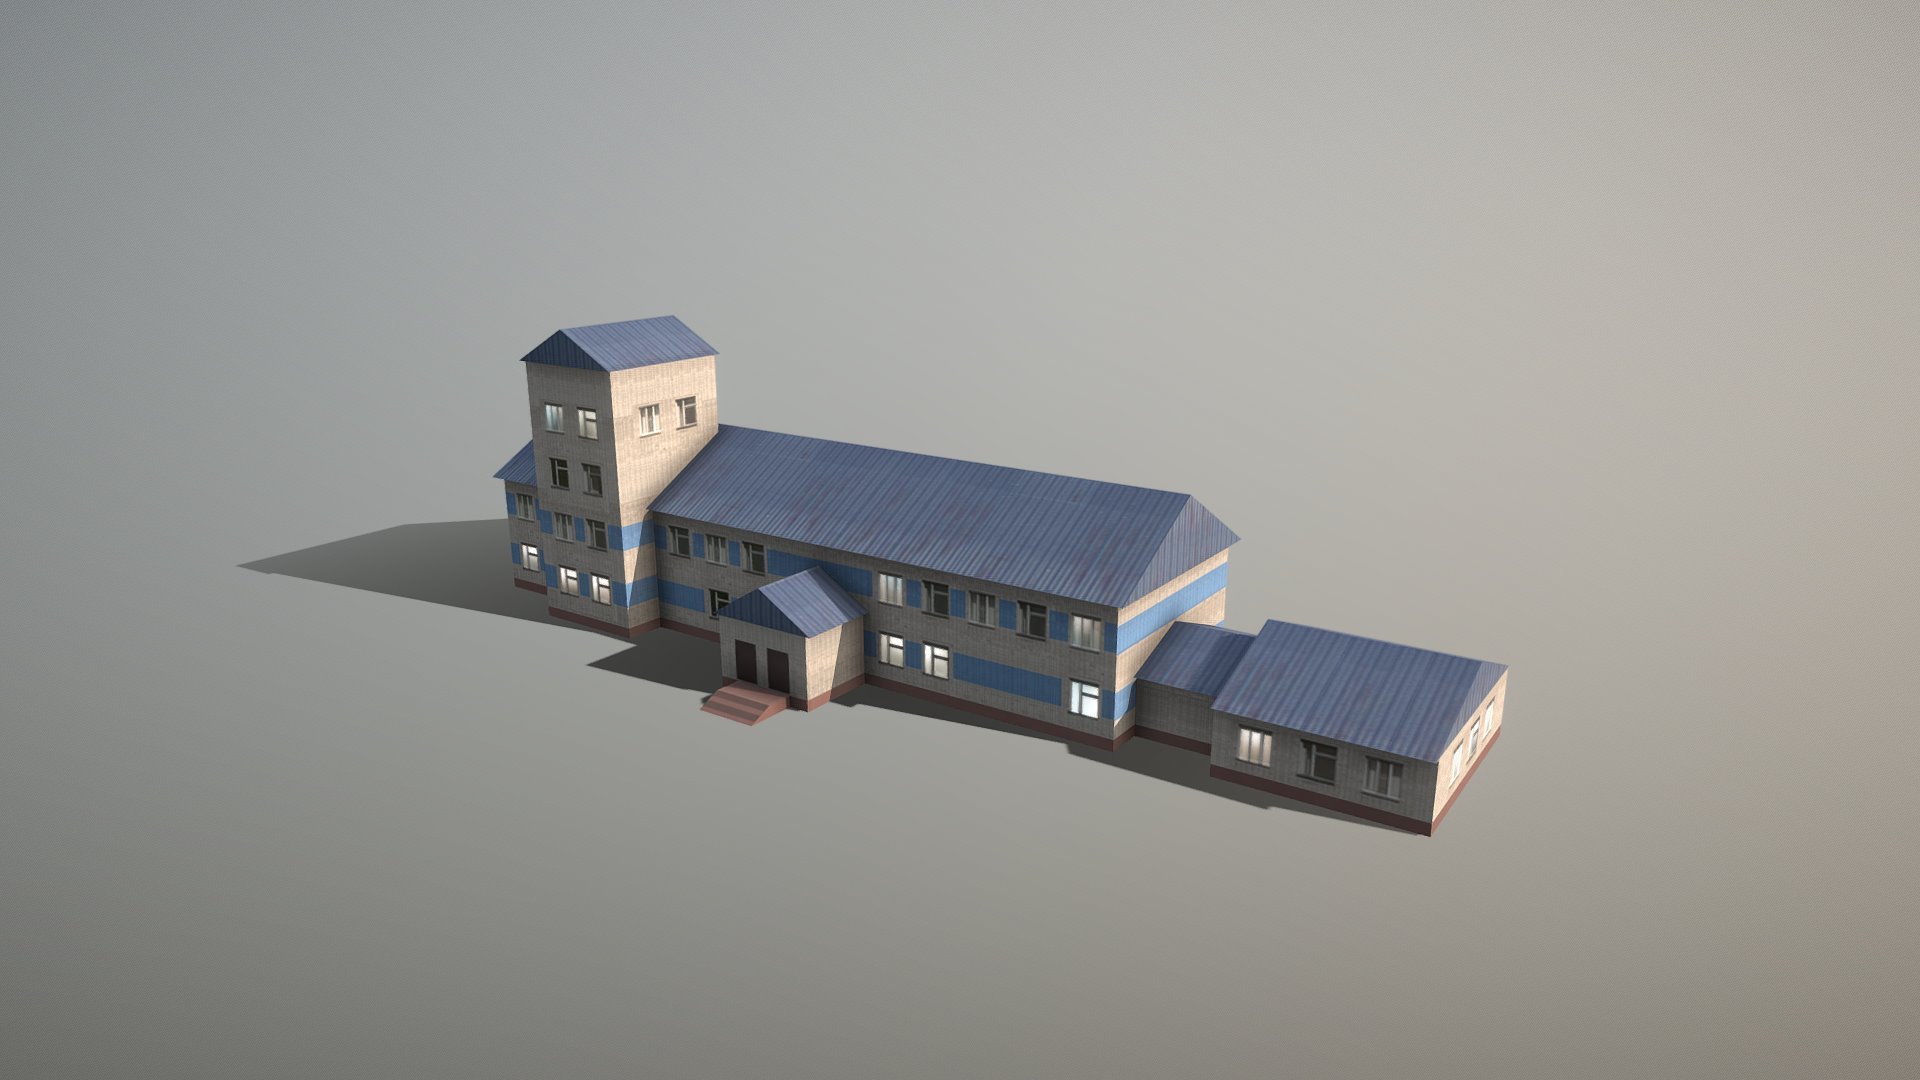 Airport USDU_Terminal




LOD0 - (triangles 175) / (points 124)

LOD1 - (triangles 119) / (points 92) 

Low-poly 3D Airport Terminal with LODs




Textures for standart shader (Albedo, AO, Gloss, Emission) they may be used with Unity3D, Unreal Engine. 

Textures for SUMMER and WINTER 


Сontains 2 LODs




Textures:




USDU_Terminal_Albedo.png      - 1024x1024

USDU_Terminal_AmbientOcclusion.png    - 1024x1024

USDU_Terminal_Emission.png        - 1024x1024

USDU_Terminal_Gloss.png       - 1024x1024

for WINTER

USDU_Terminal_Albedo.png      - 1024x1024



If you have questions about my models or need any kind of help, feel free to contact me and i'll do my best to help you 3d model